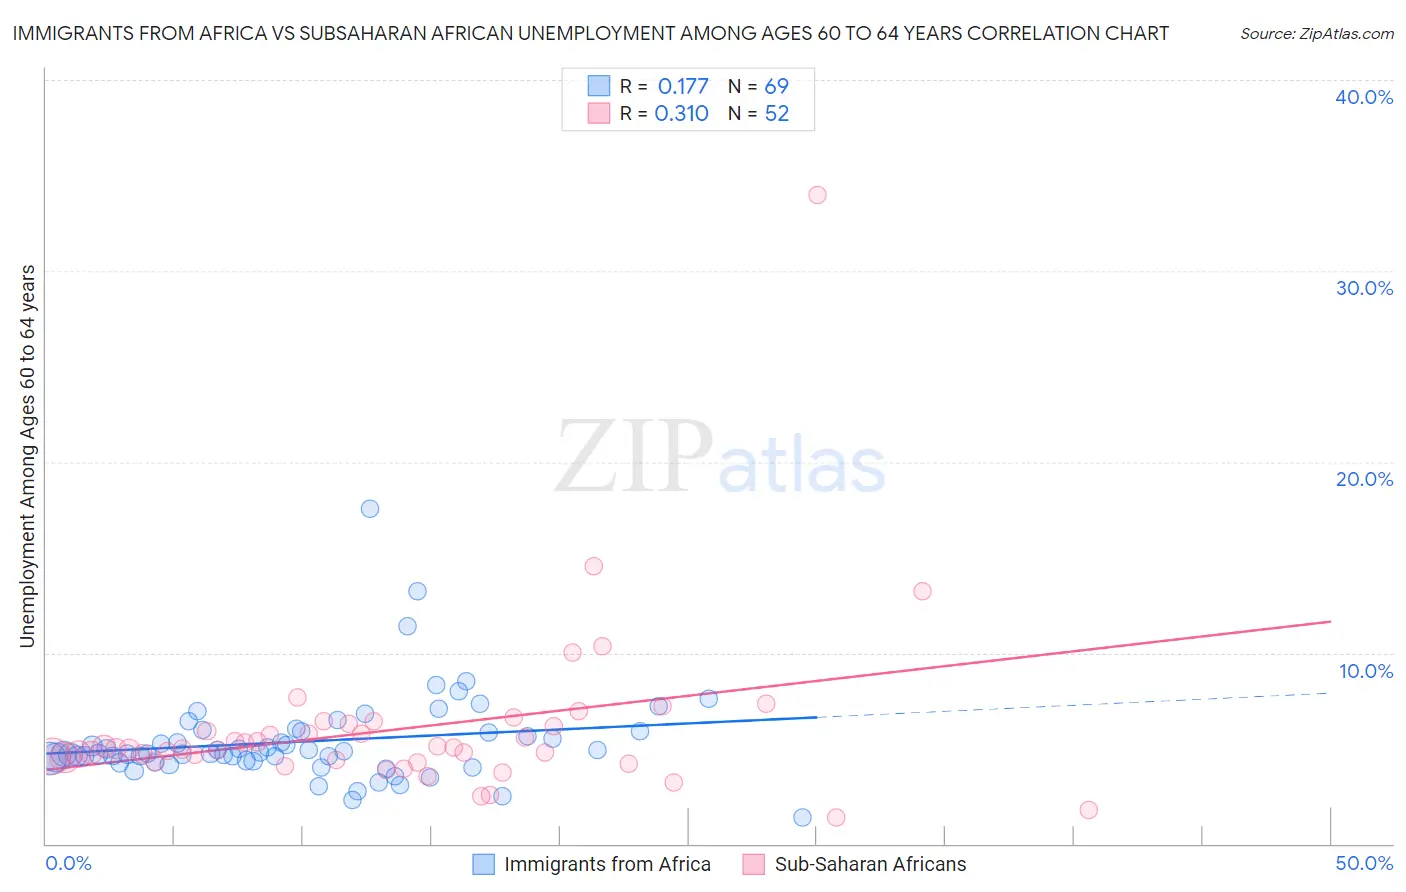 Immigrants from Africa vs Subsaharan African Unemployment Among Ages 60 to 64 years